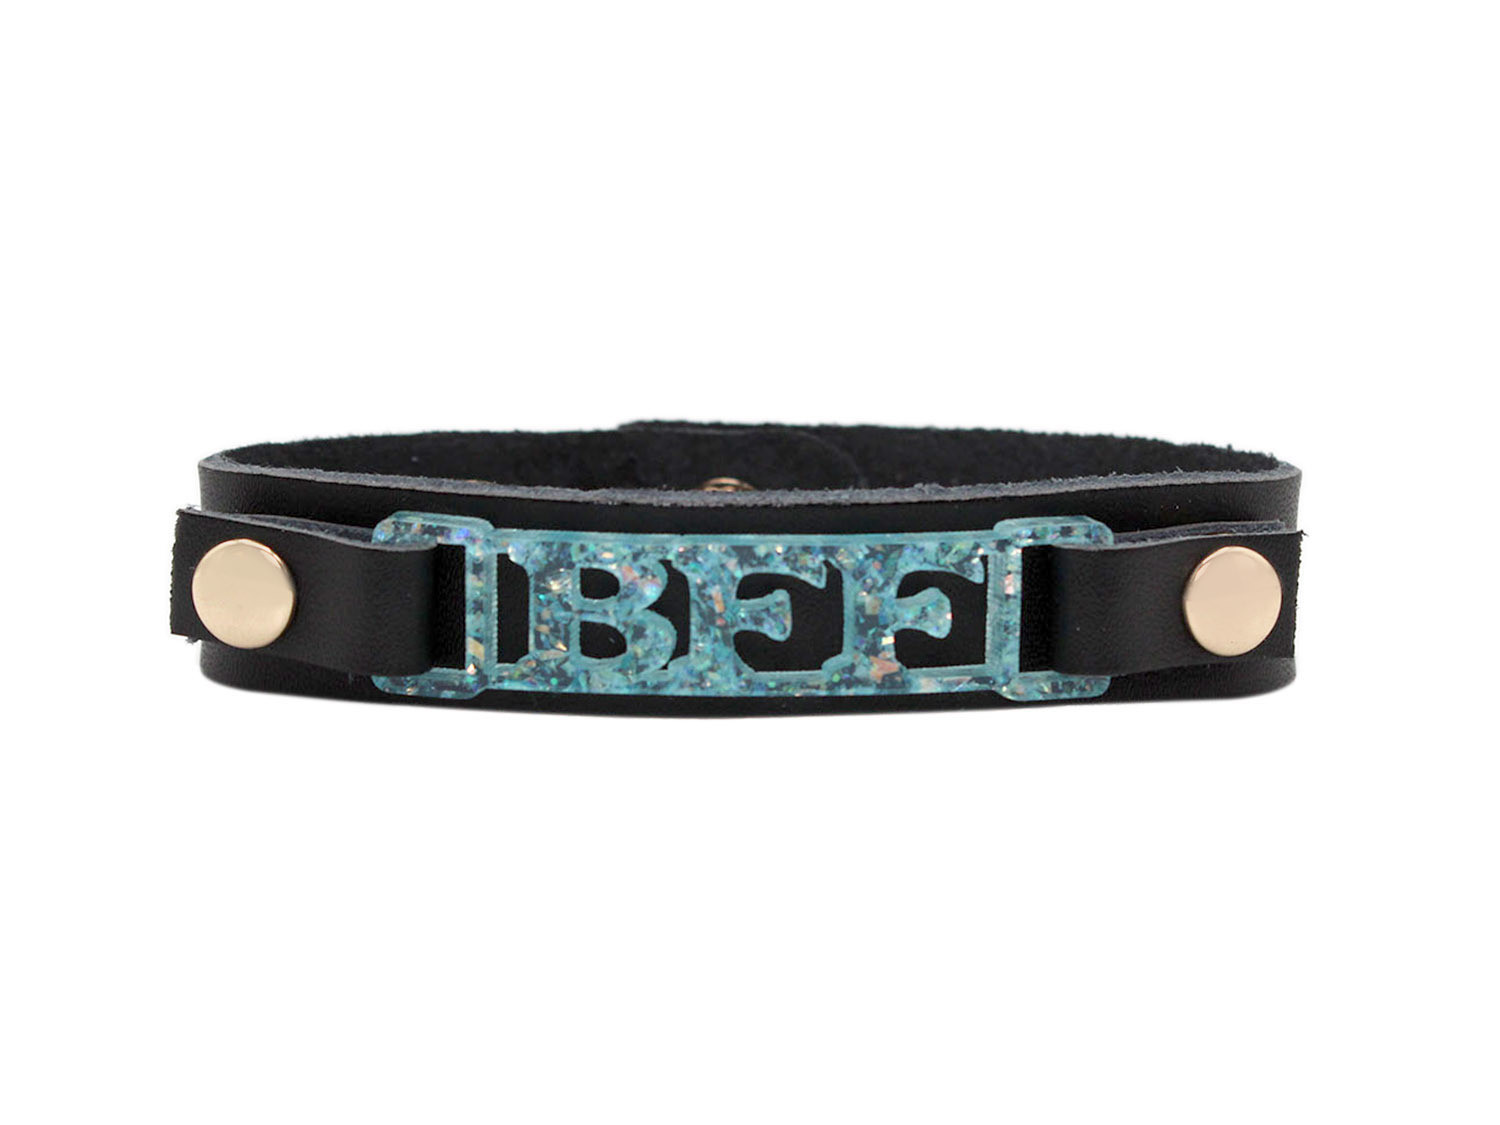 Metropolitan Cuff with Zoe Style Plaque "BFF"